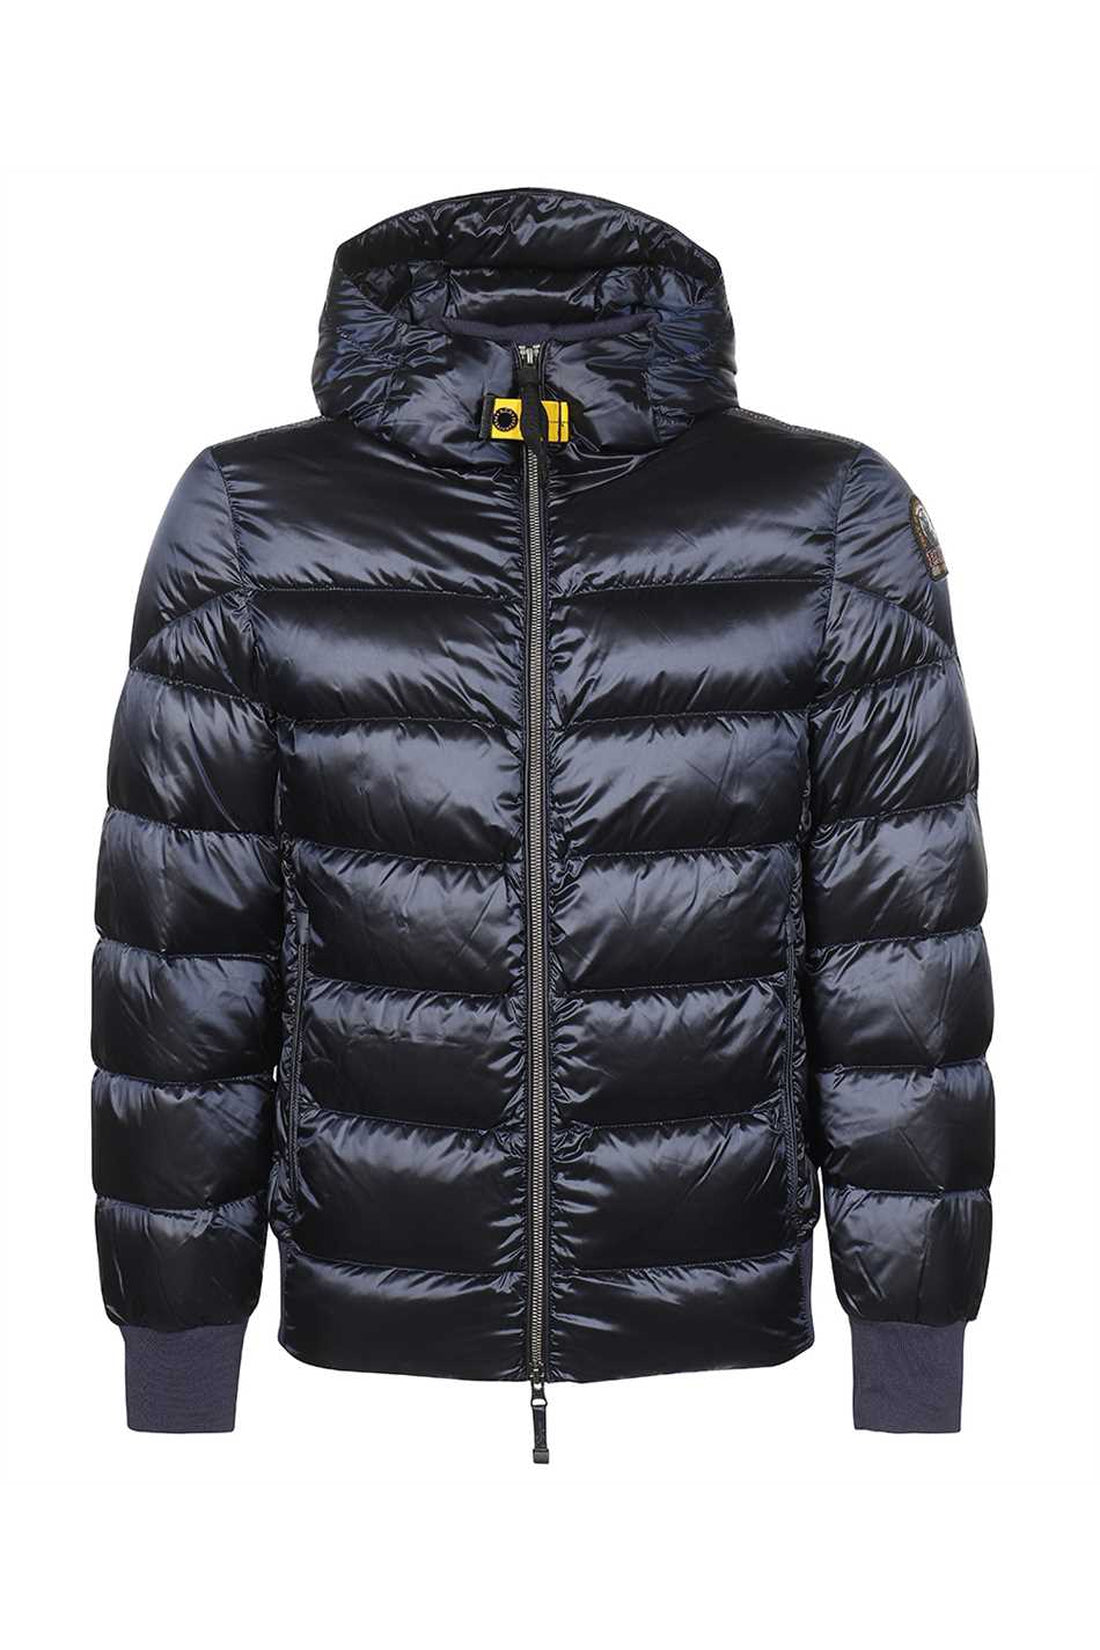 Parajumpers-OUTLET-SALE-Pharrell hooded down jacket-ARCHIVIST